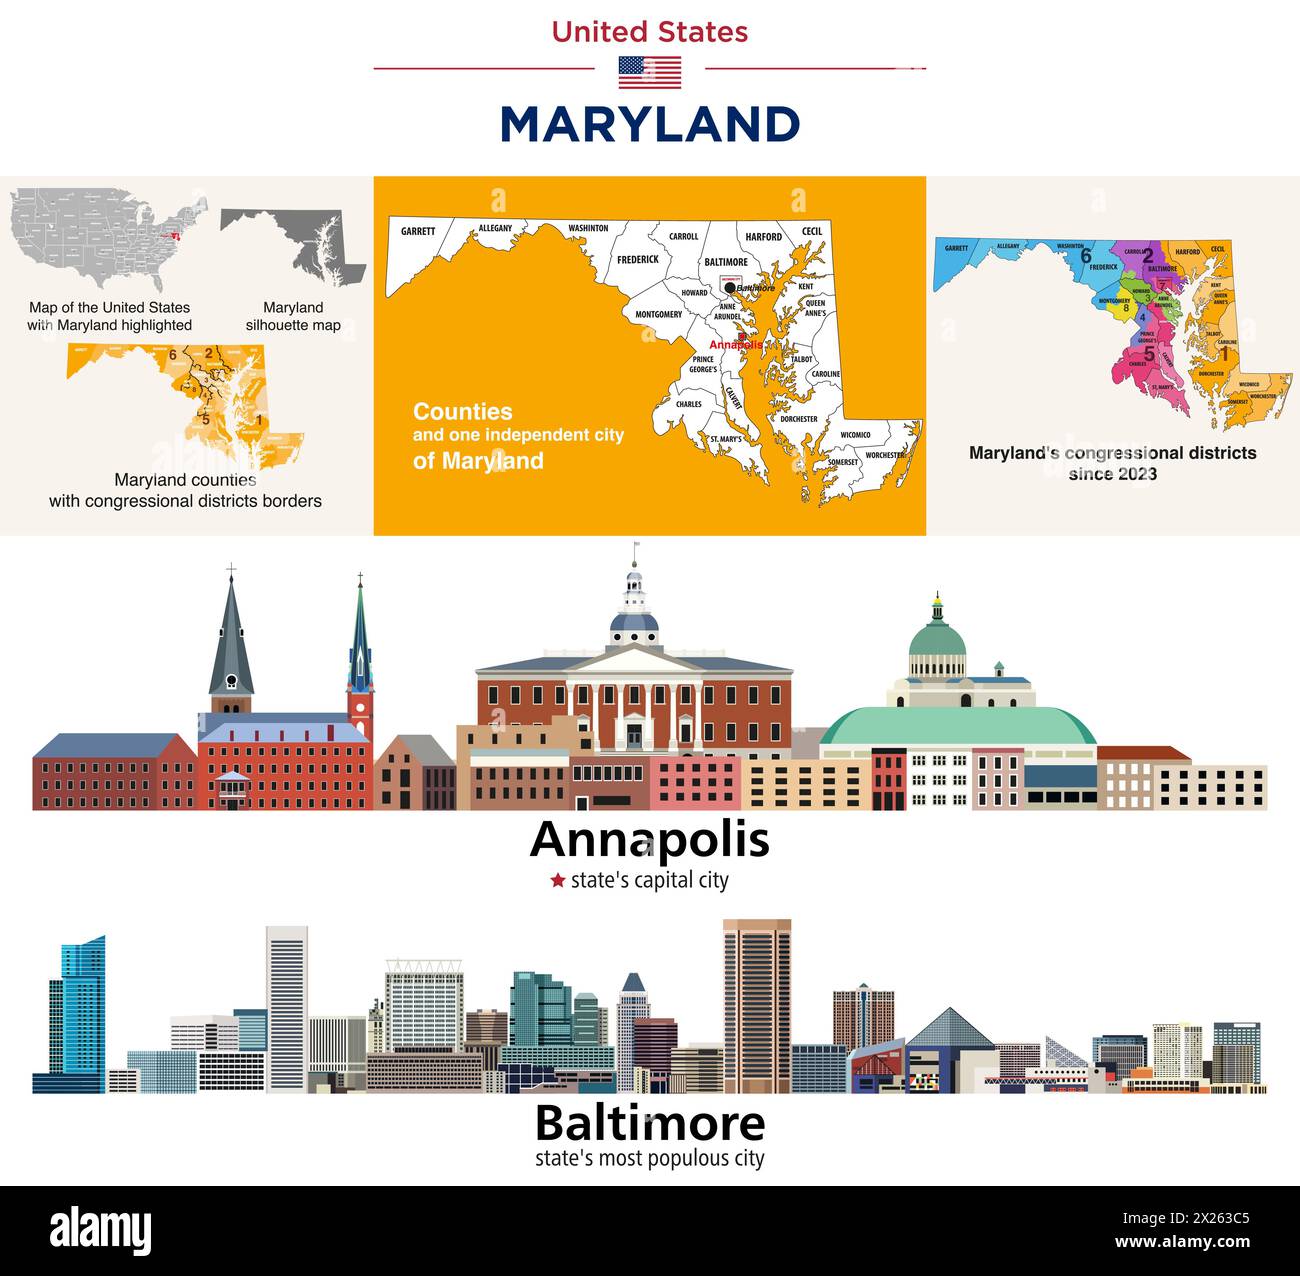 Maryland's counties map and congressional districts since 2023 map. Annapolis (state's capital city) and Baltimore (state's most populous city) skylin Stock Vector